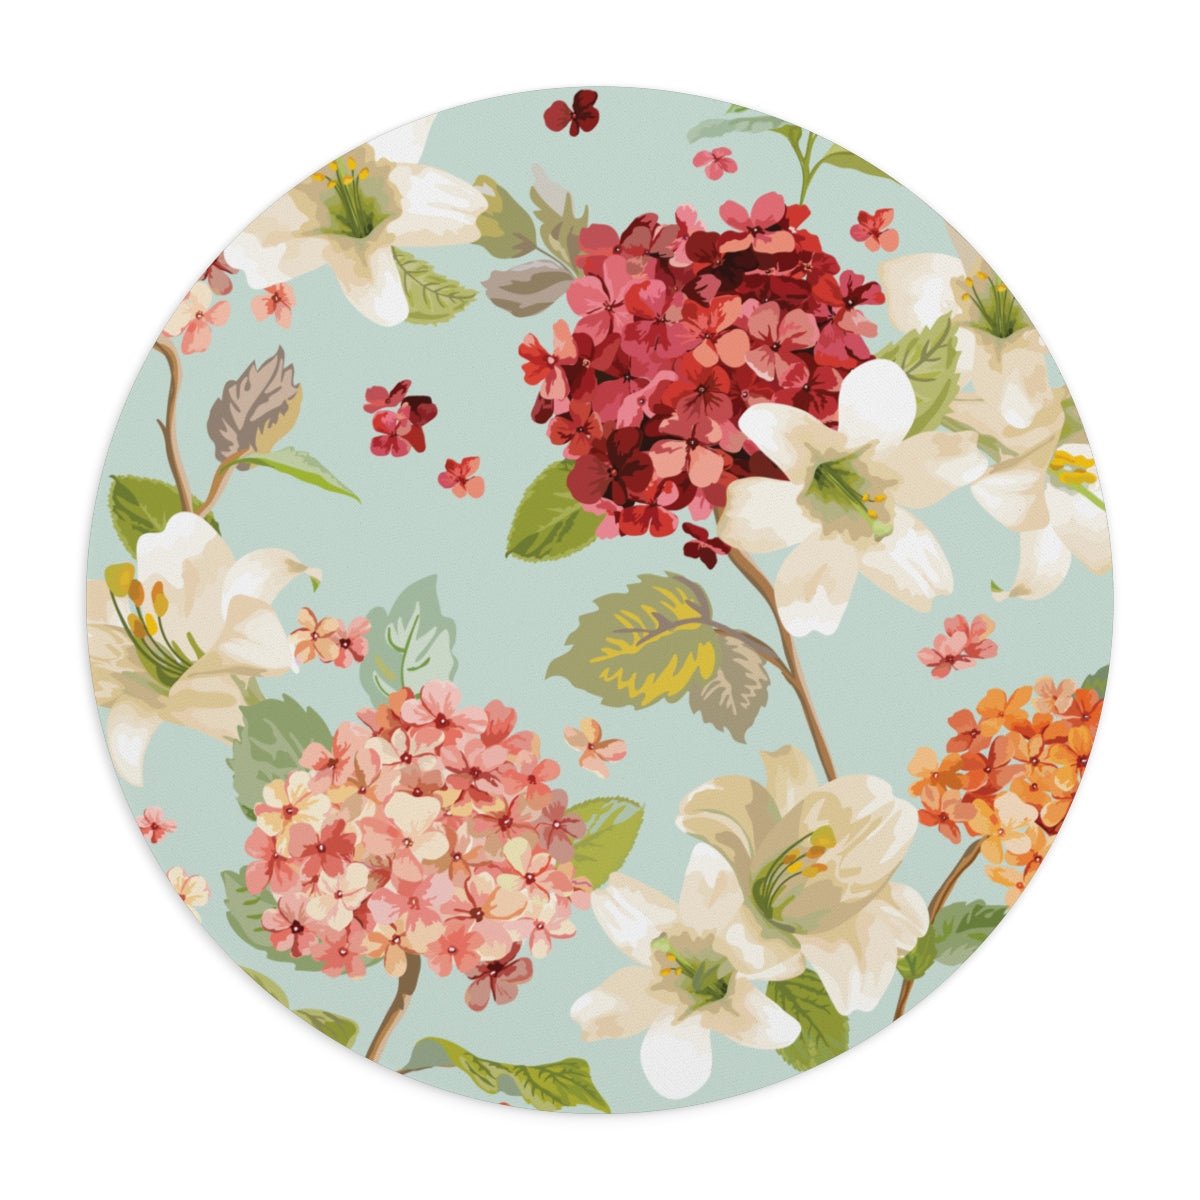 Autumn Hortensia and Lily Flowers Mouse Pad - Puffin Lime